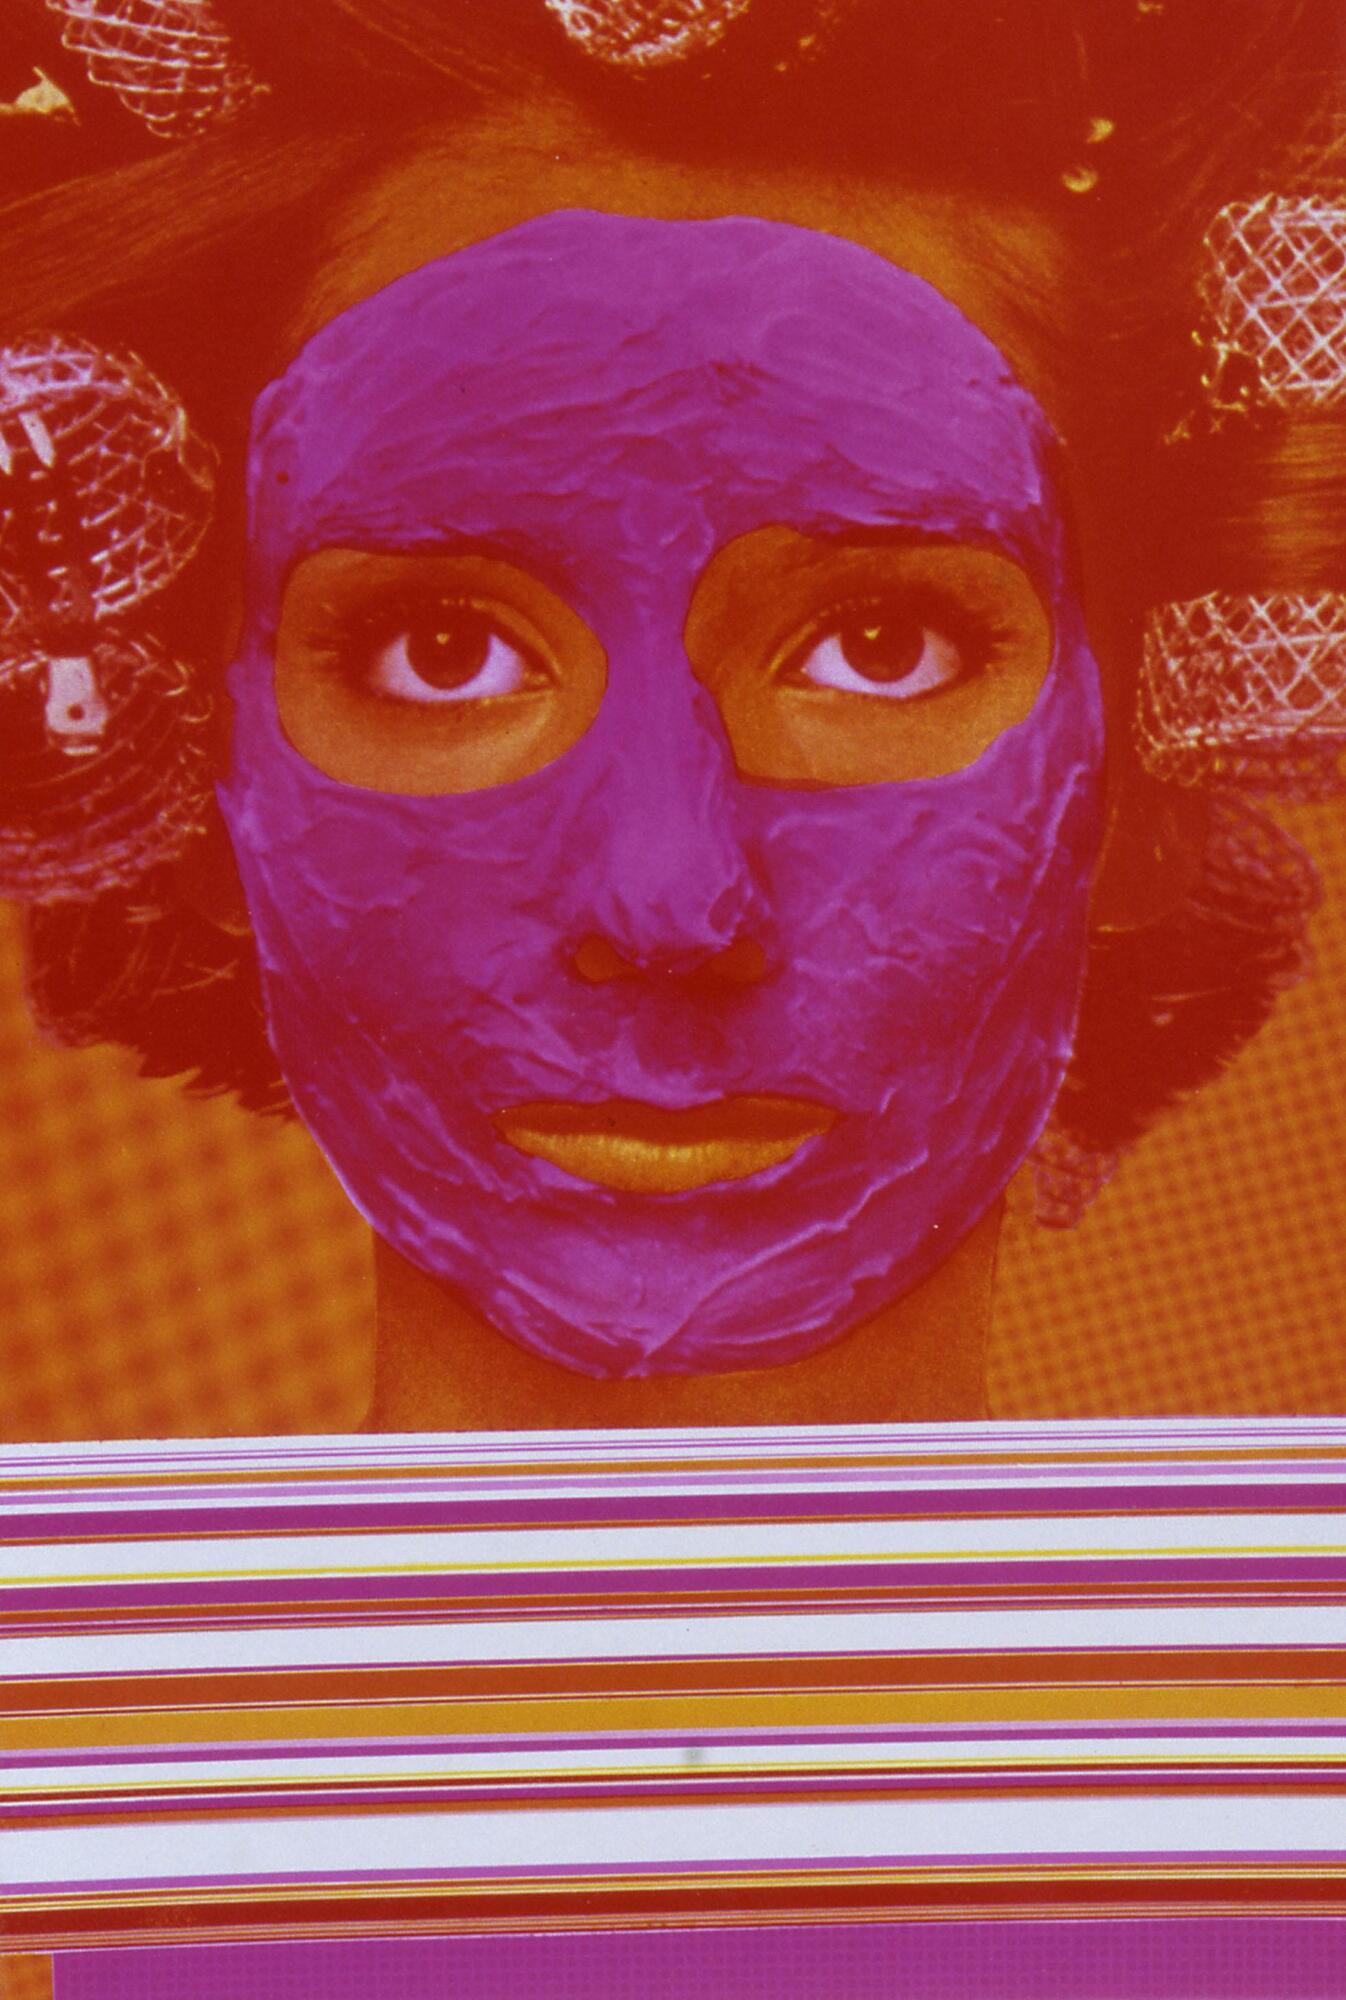 Photolithographic print in pink, orange, white and yellow with a face of a woman at the top and horizontal stripes then a grid at the bottom. The woman has metal curlers in her hair and a cosmetic face mask on, which is pink, in contrast to the orange image.